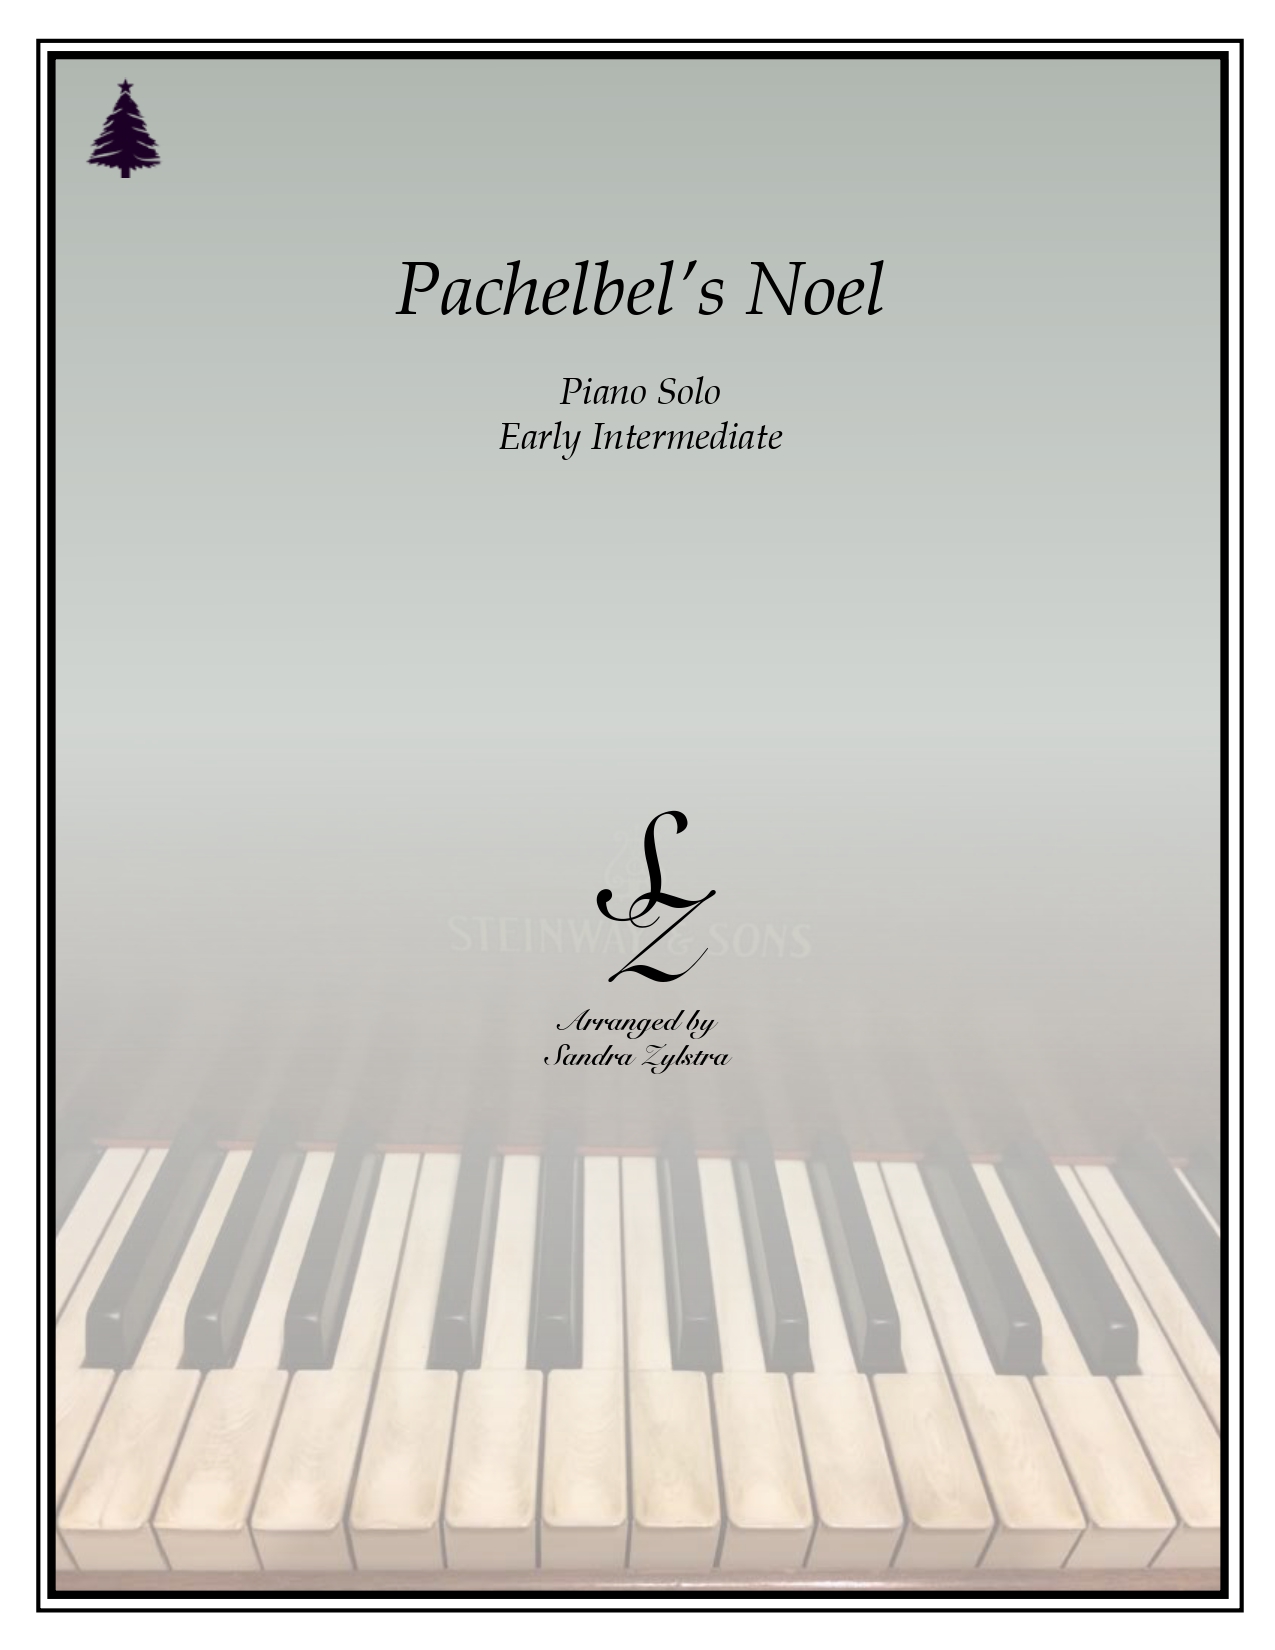 Pachelbels Noel early intermediate piano cover page 00011